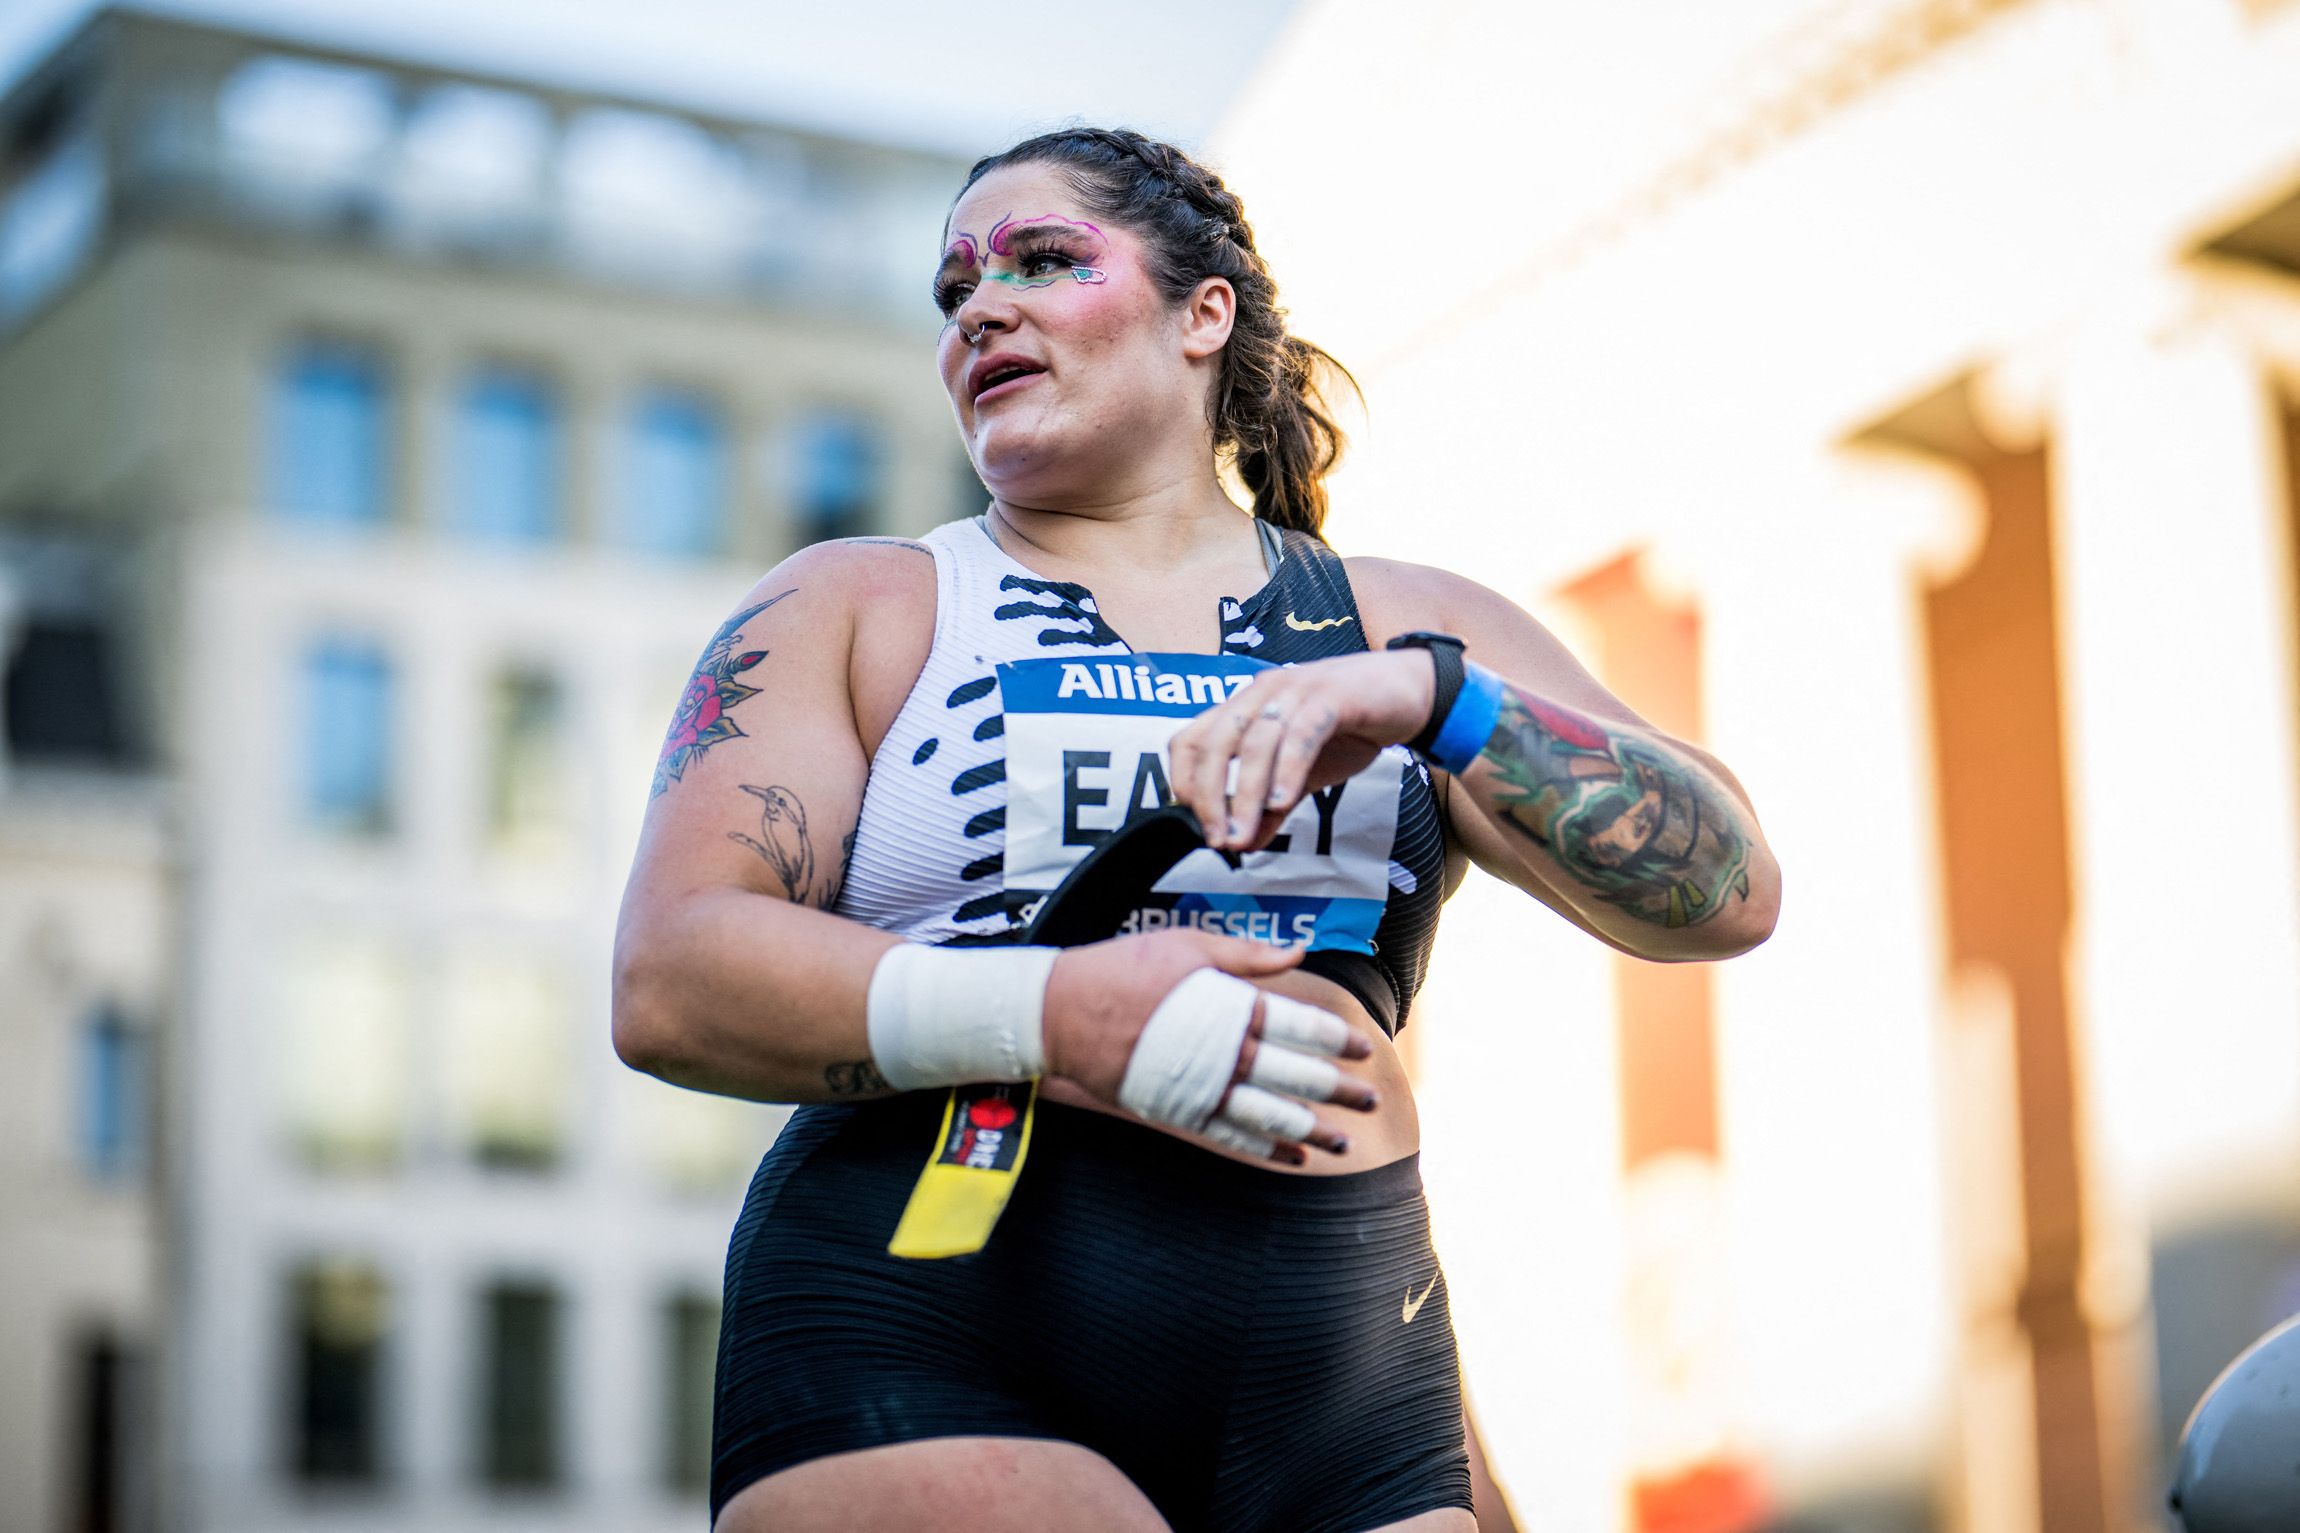 US shot putter Chase Ealey in Brussels